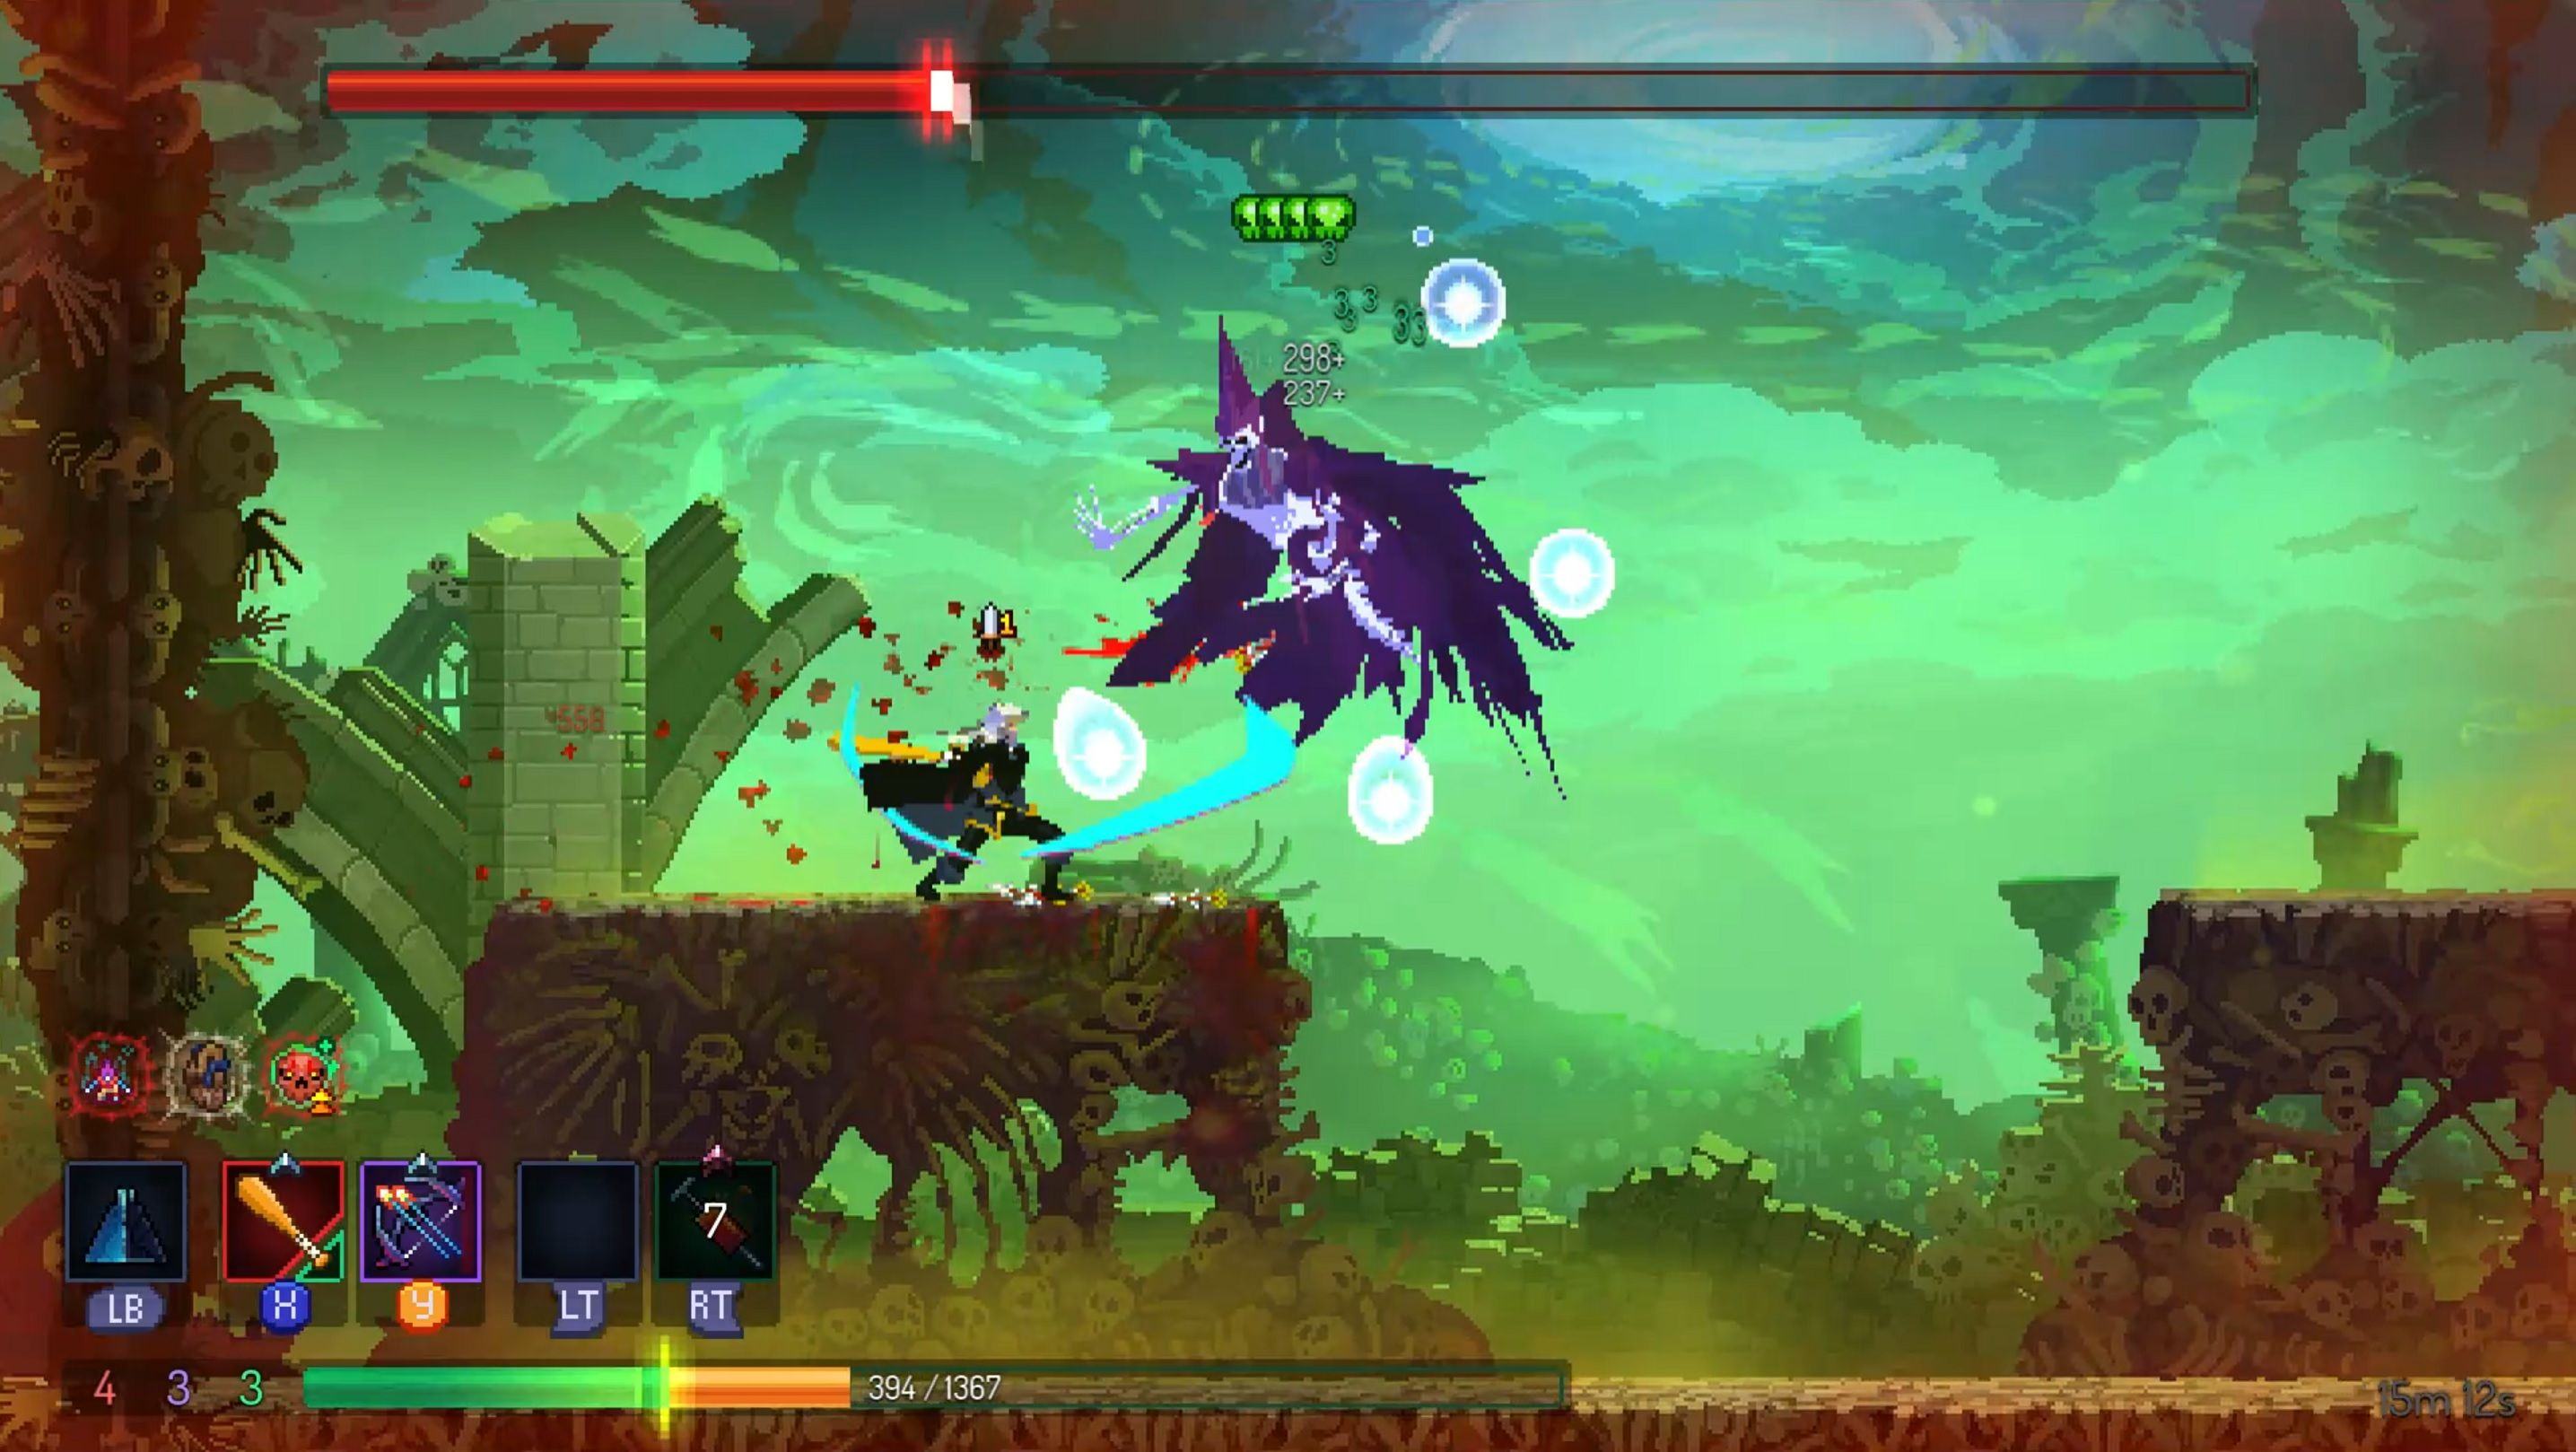 Dead Cells character dressed as Alucard fighting Death looks like a skeleton with a silly hat